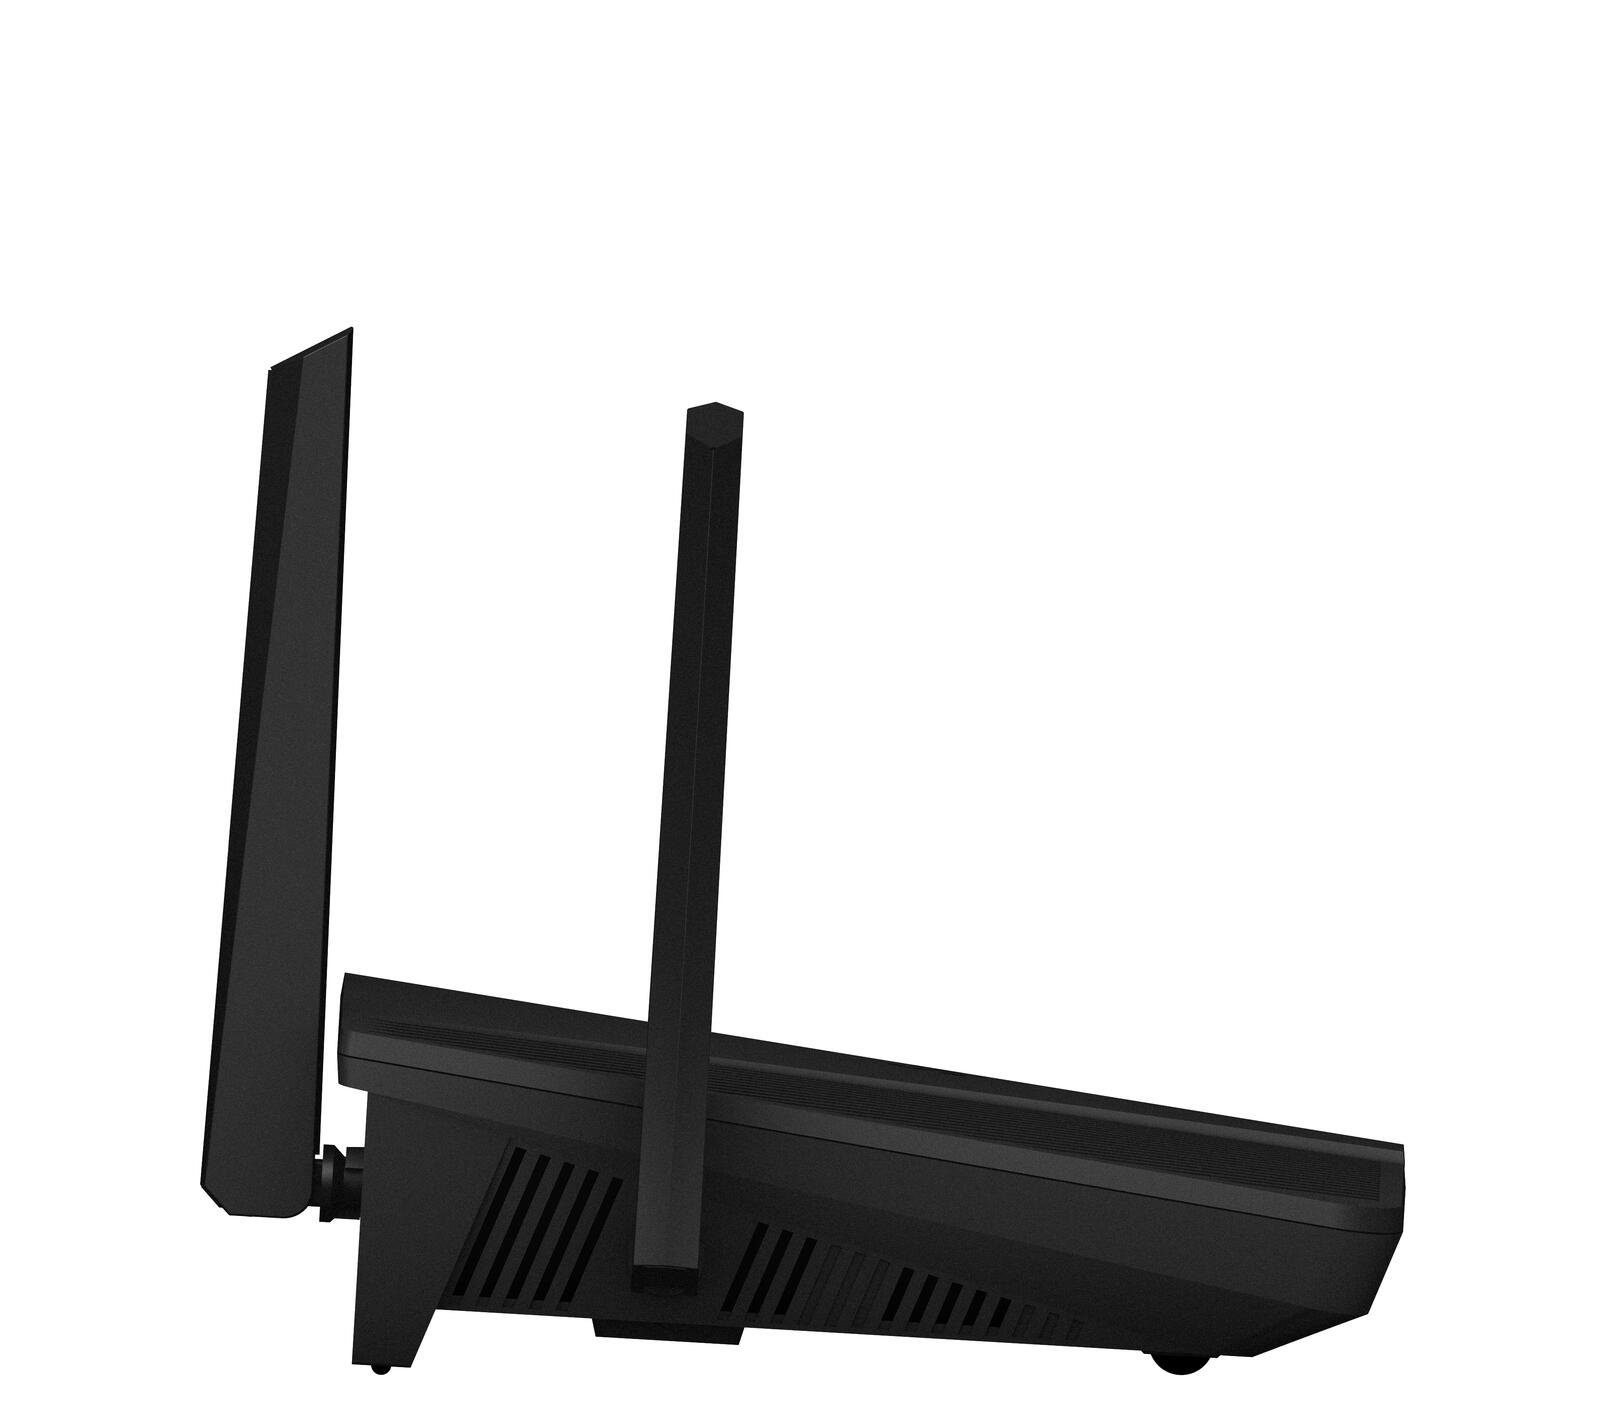 RT6600AX WLAN-Router Synology Synology